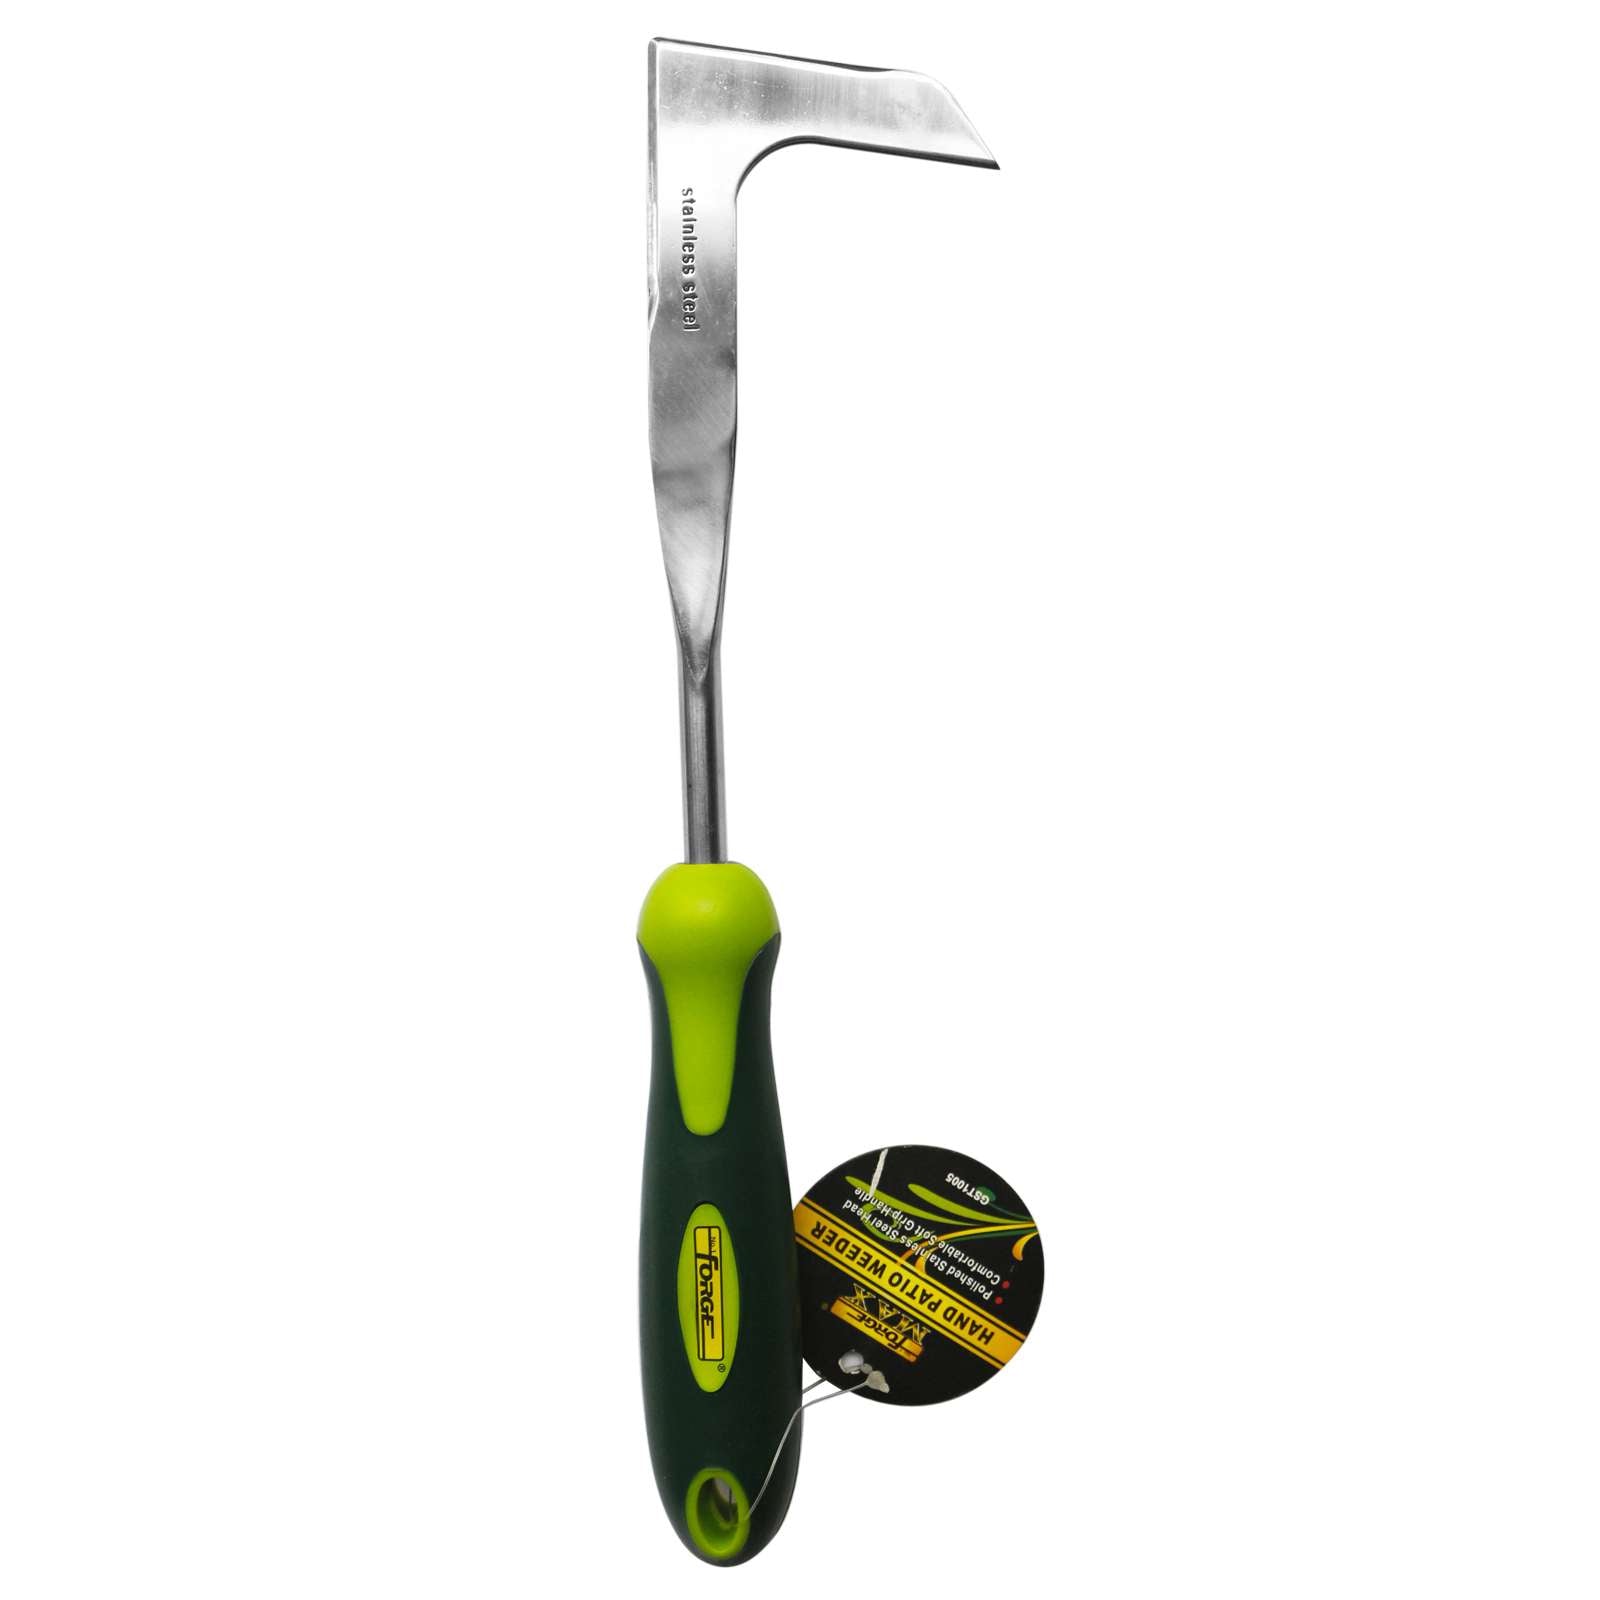 Stainless Steel Patio Hand Weeder - 1